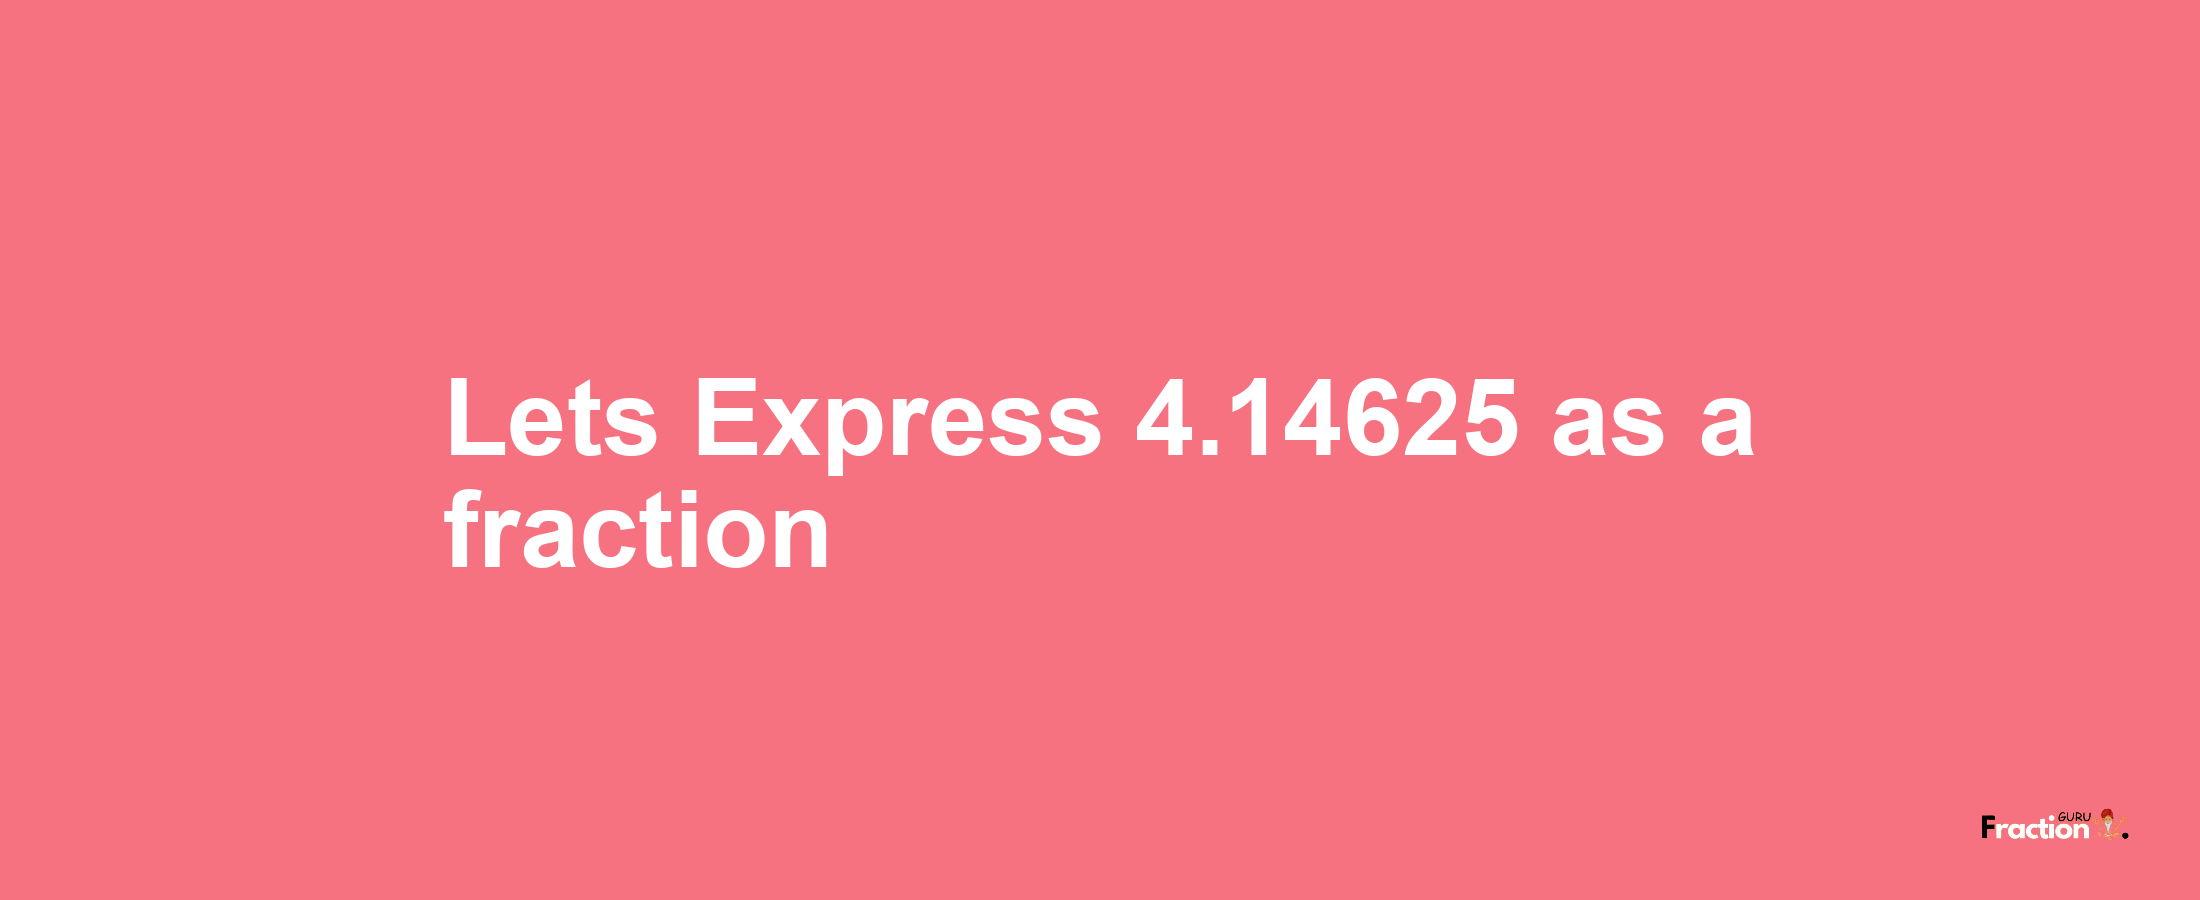 Lets Express 4.14625 as afraction